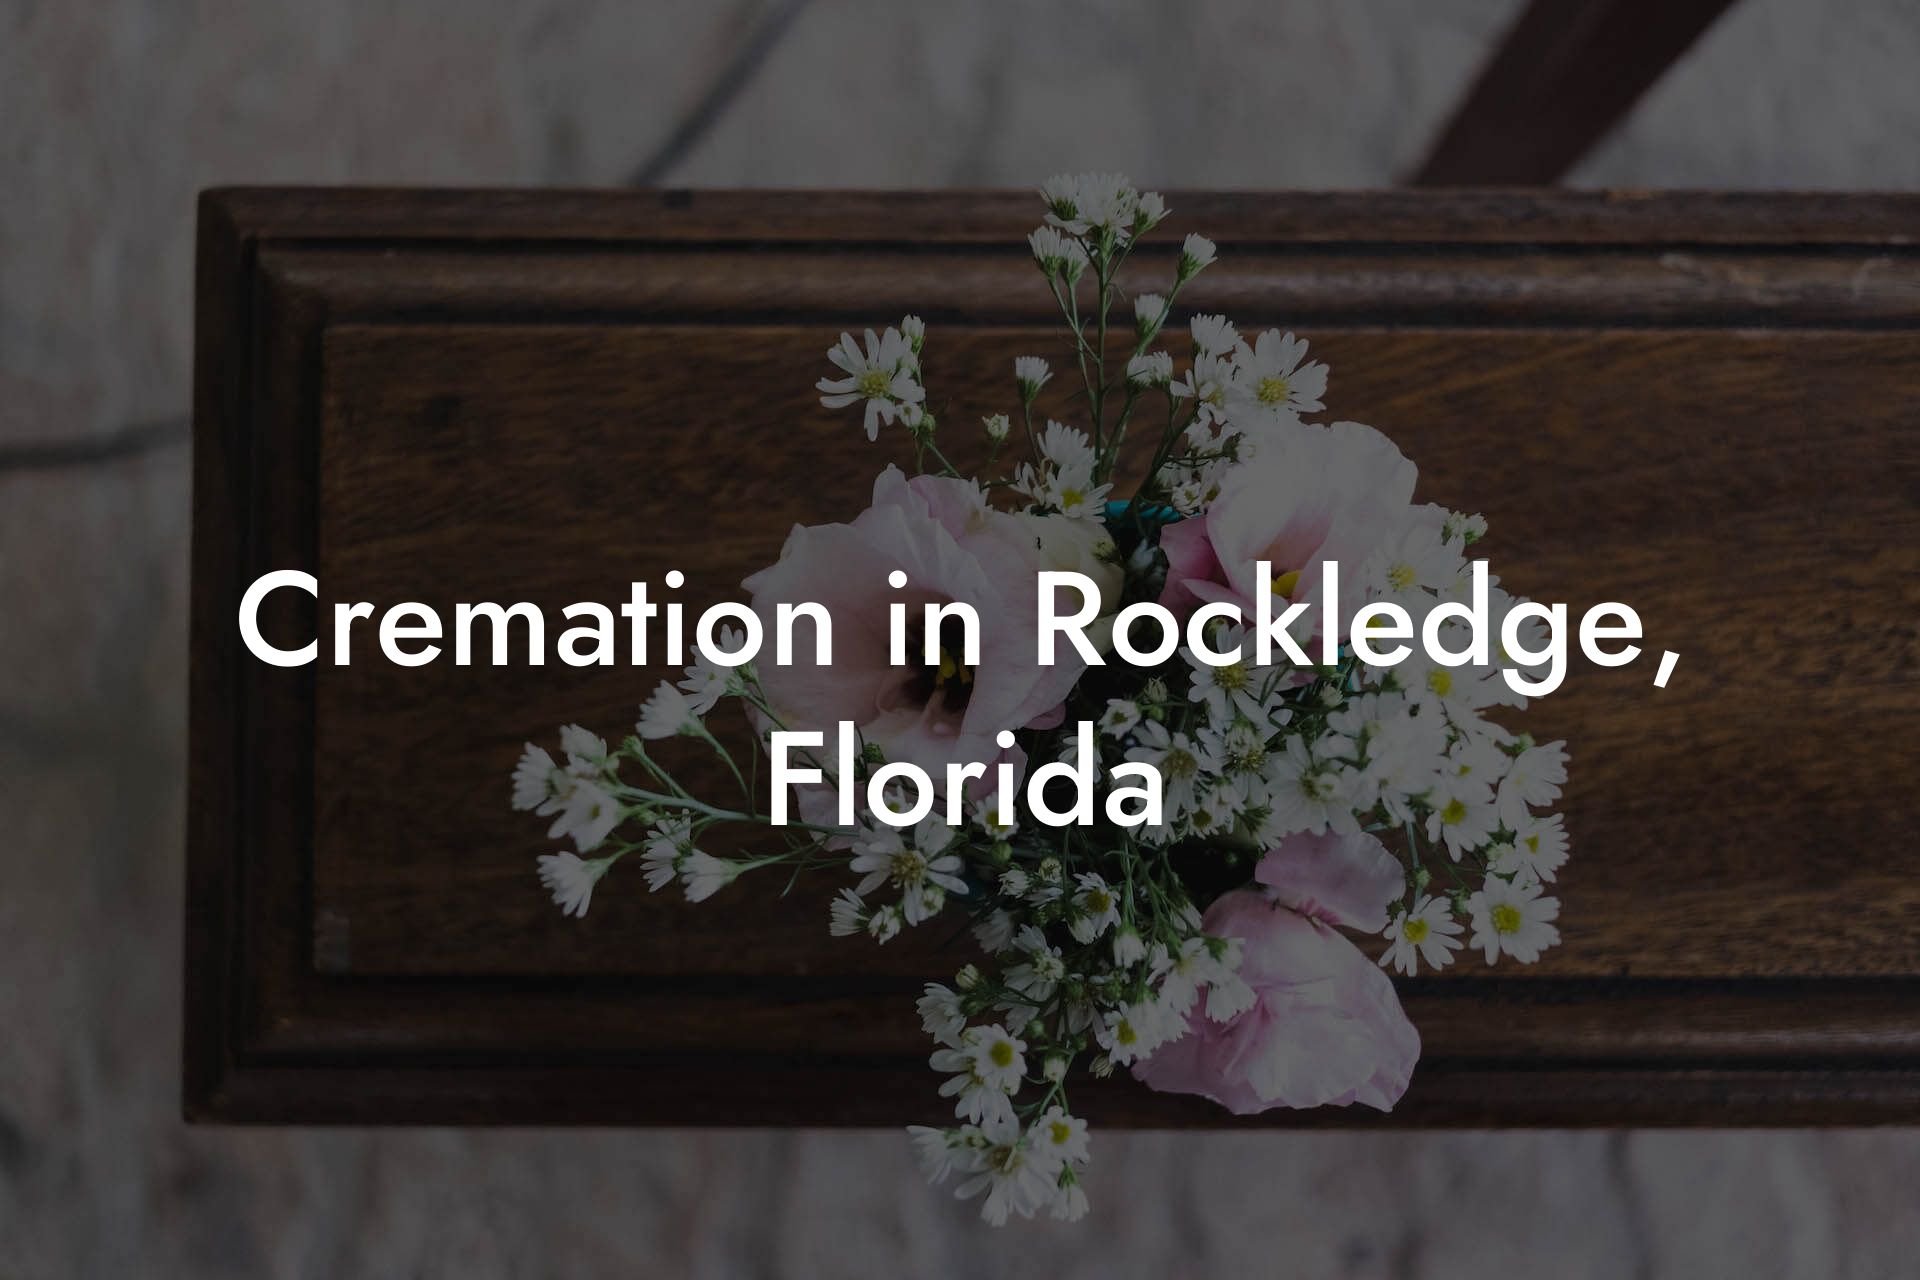 Cremation in Rockledge, Florida